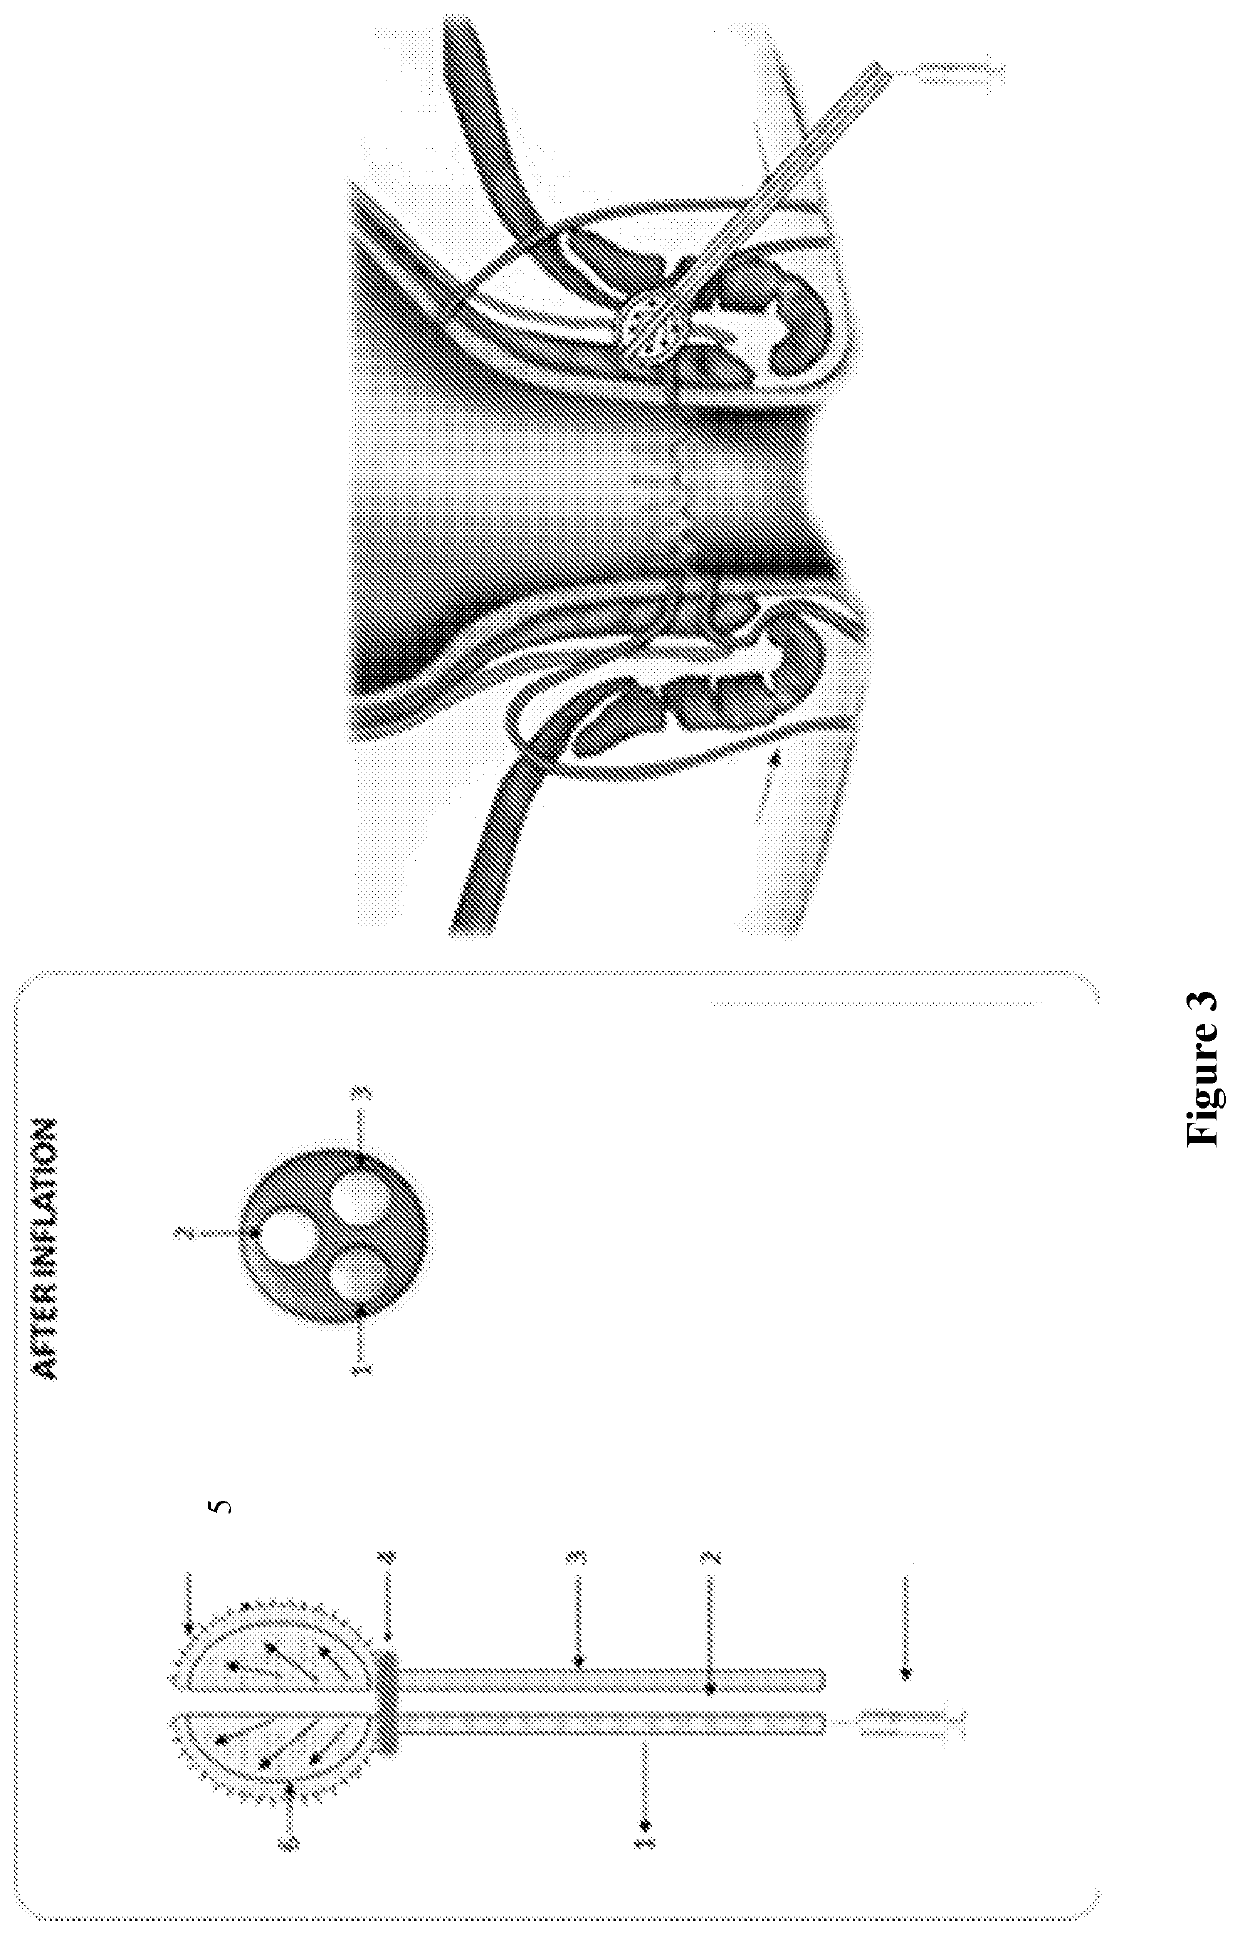 A device for the treatment of anal fistula-in-ano and complex fistula-in-ano